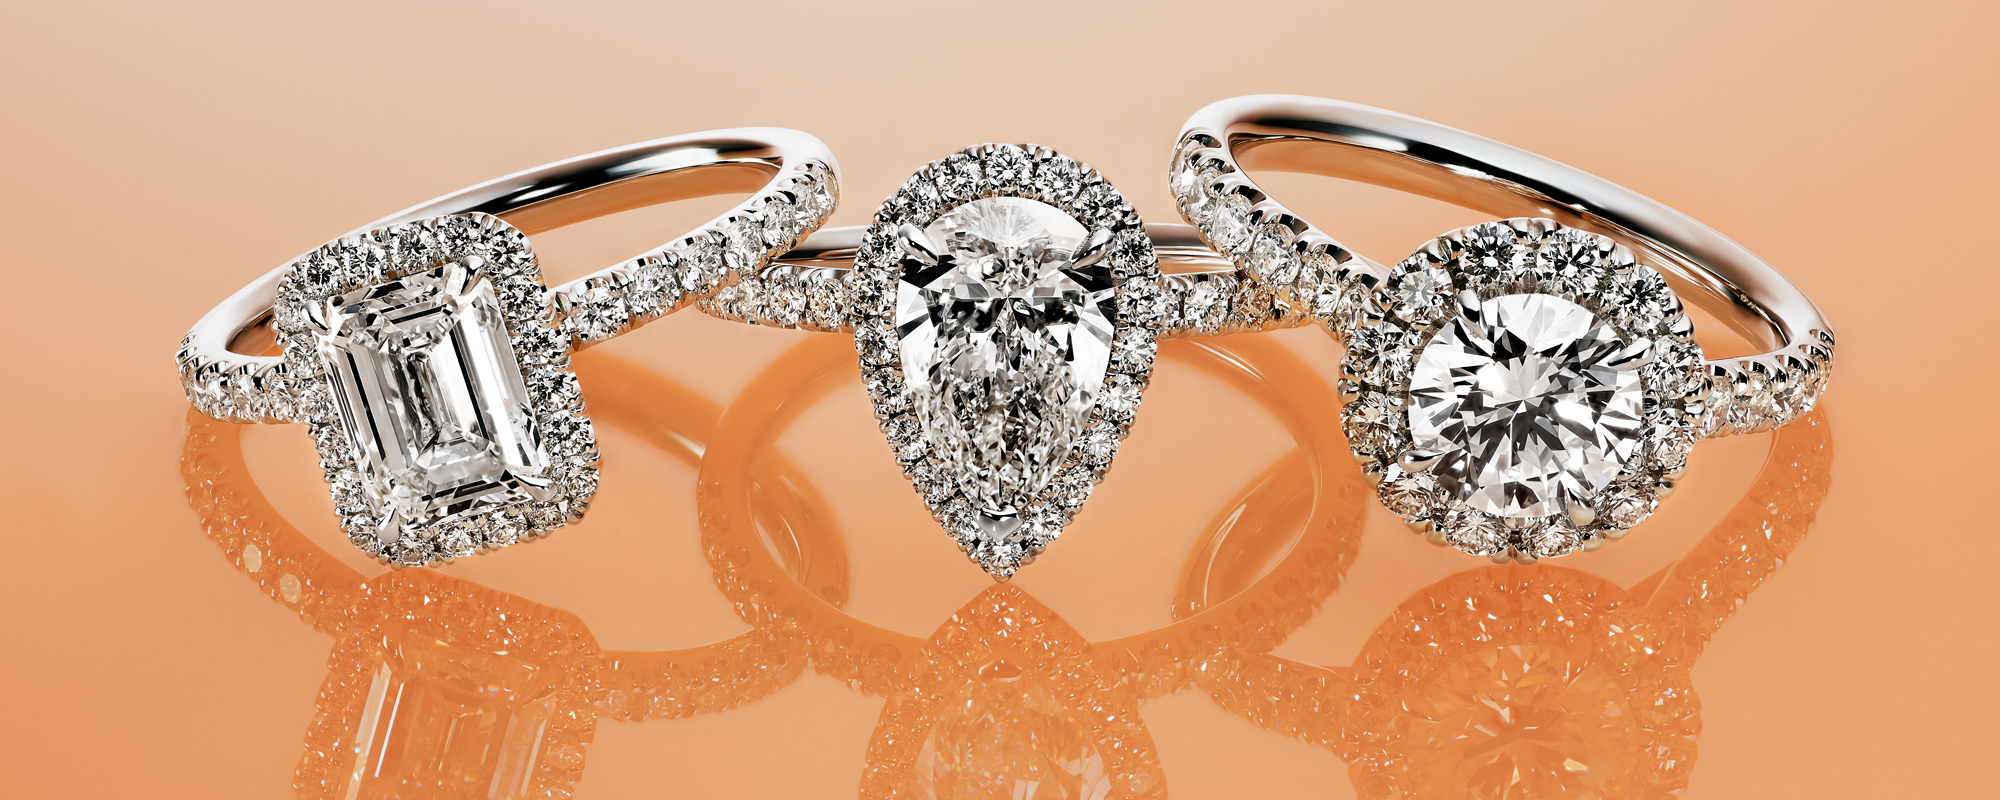 Buying an Engagement Ring? Here are 16 Pieces of Advice | BriteCo Jewelry  Insurance